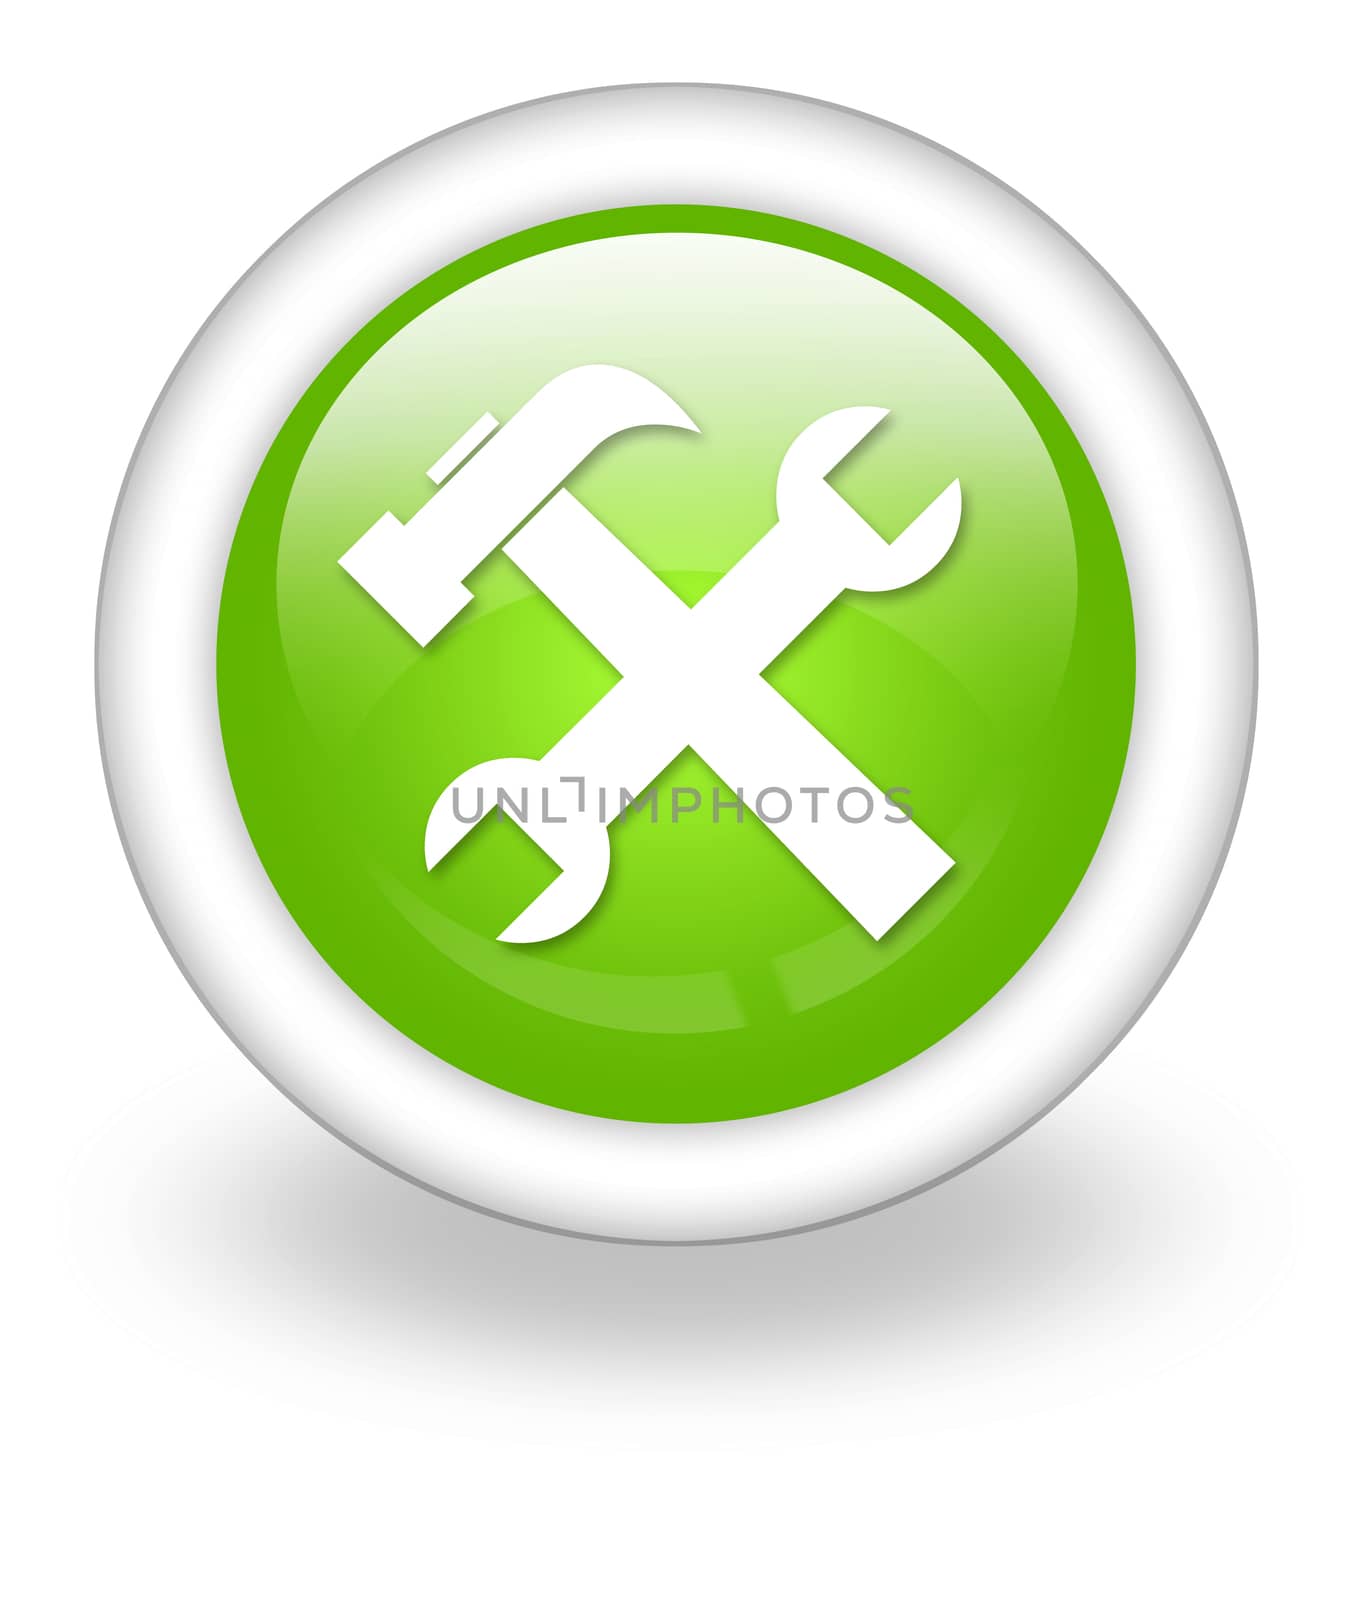 Icon, Button, Pictogram with Tools symbol